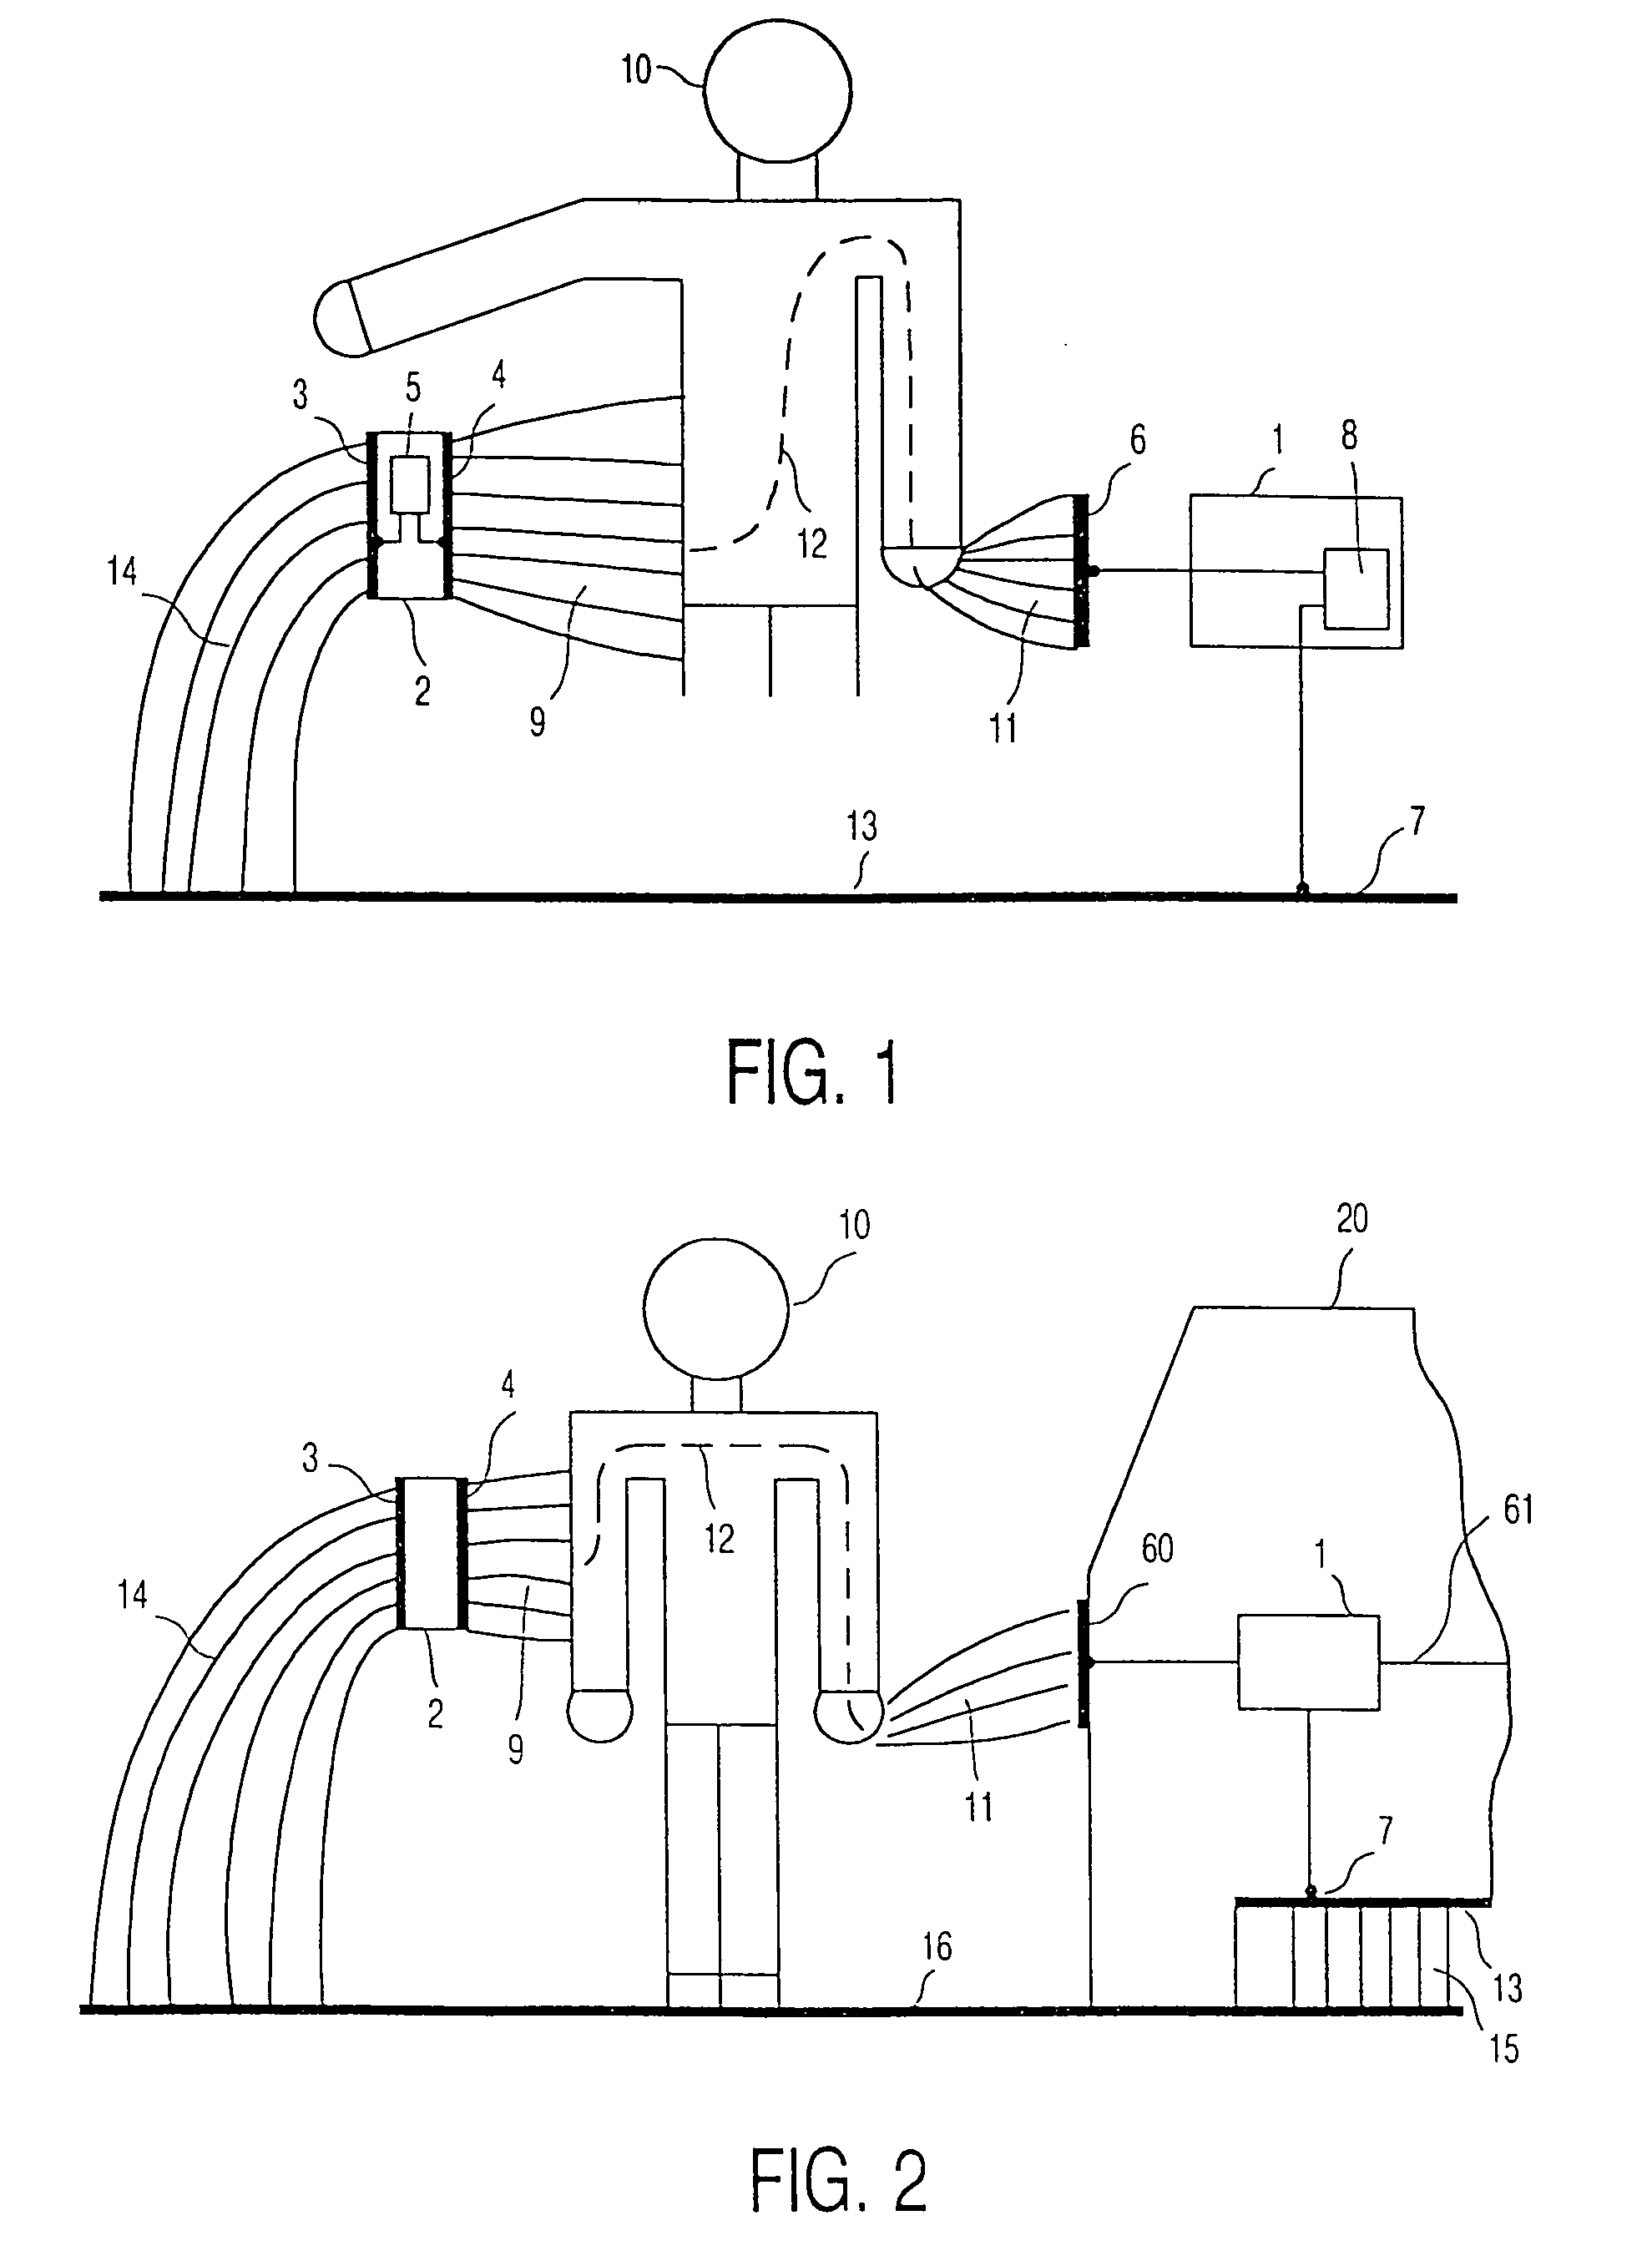 Electronic communications system